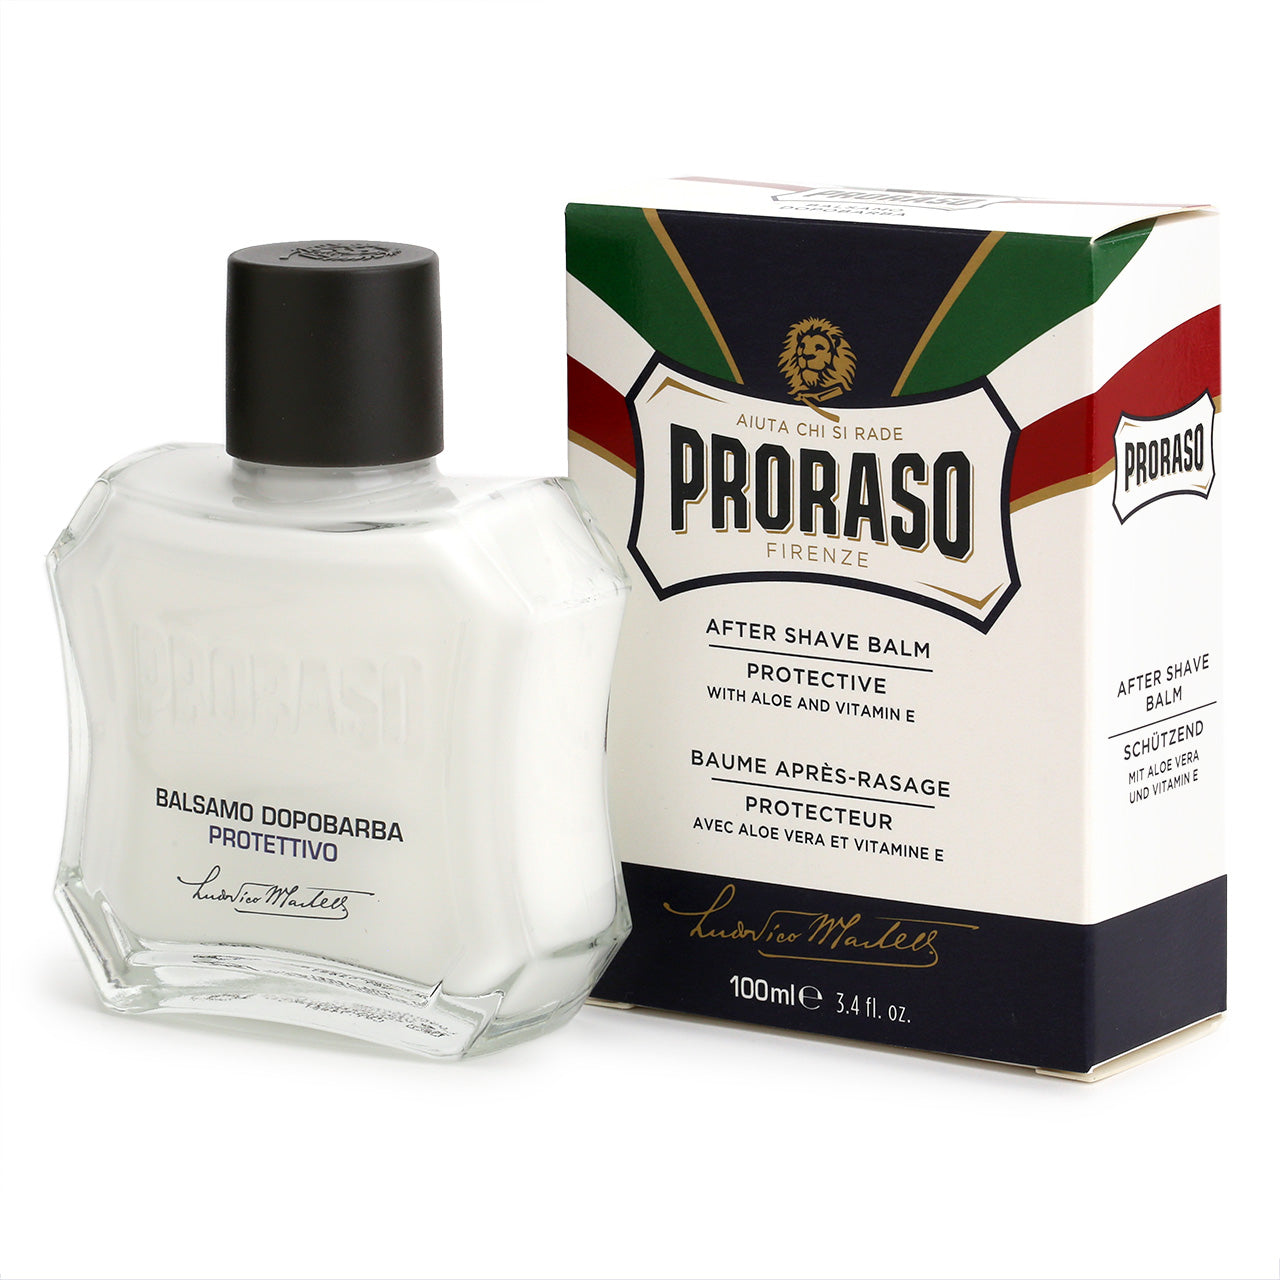 Proraso After Shave Balm with Aloe Vera & Vitamin E - Protective - with retro-shaped bottle and box